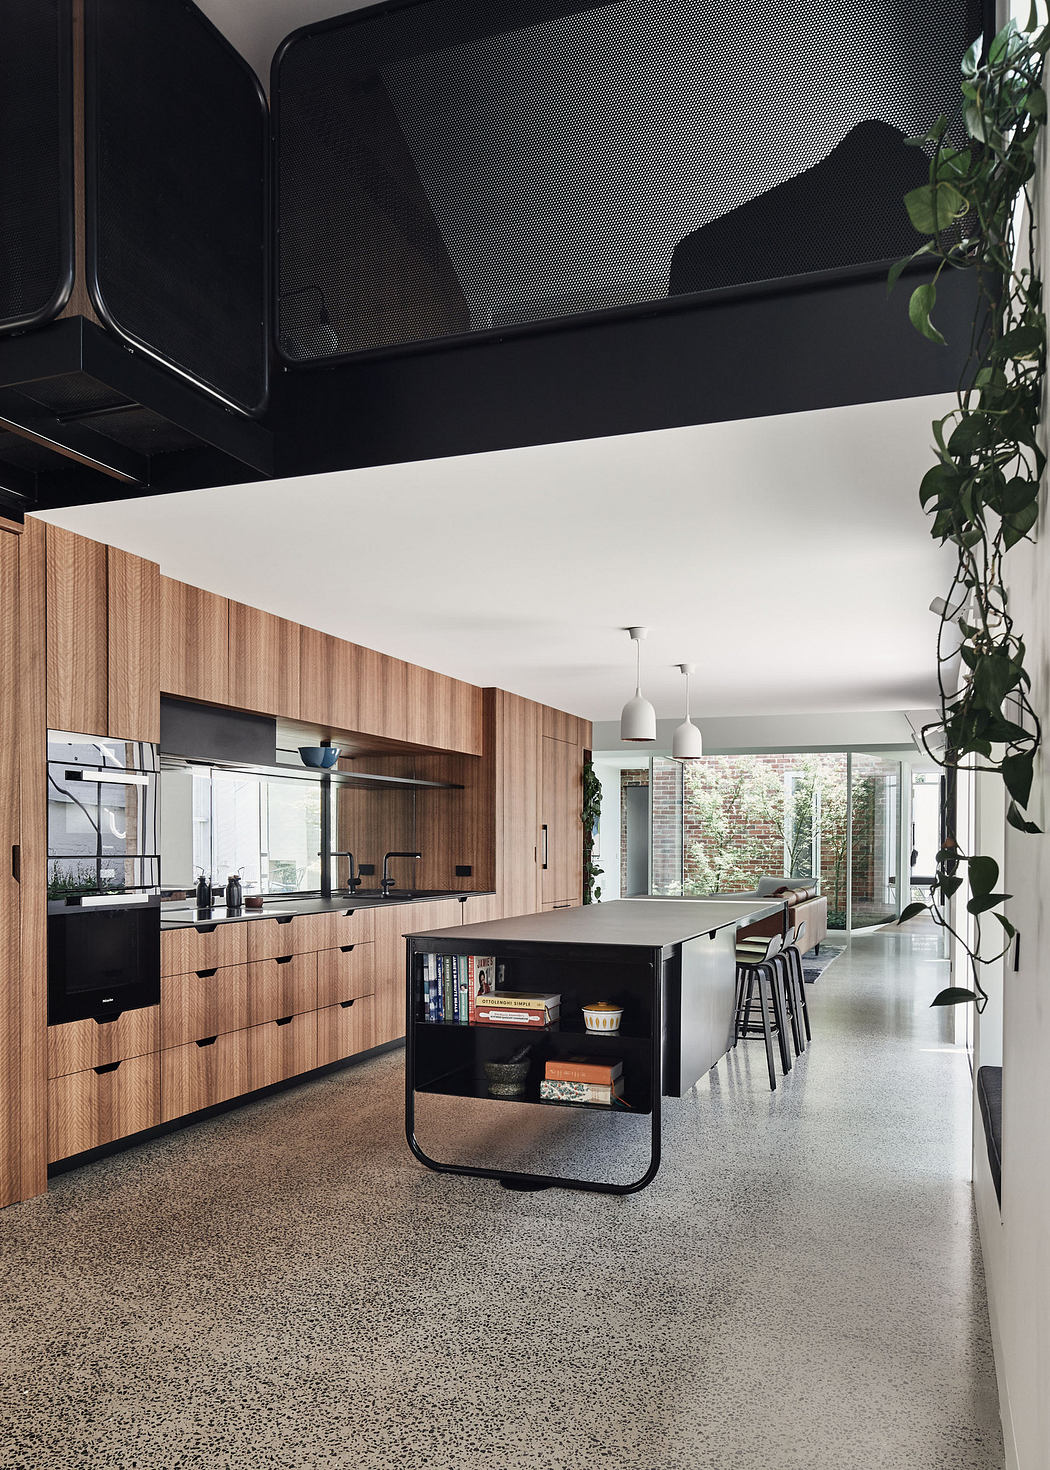 Modern kitchen interior with wooden cabinetry and terrazzo flooring.